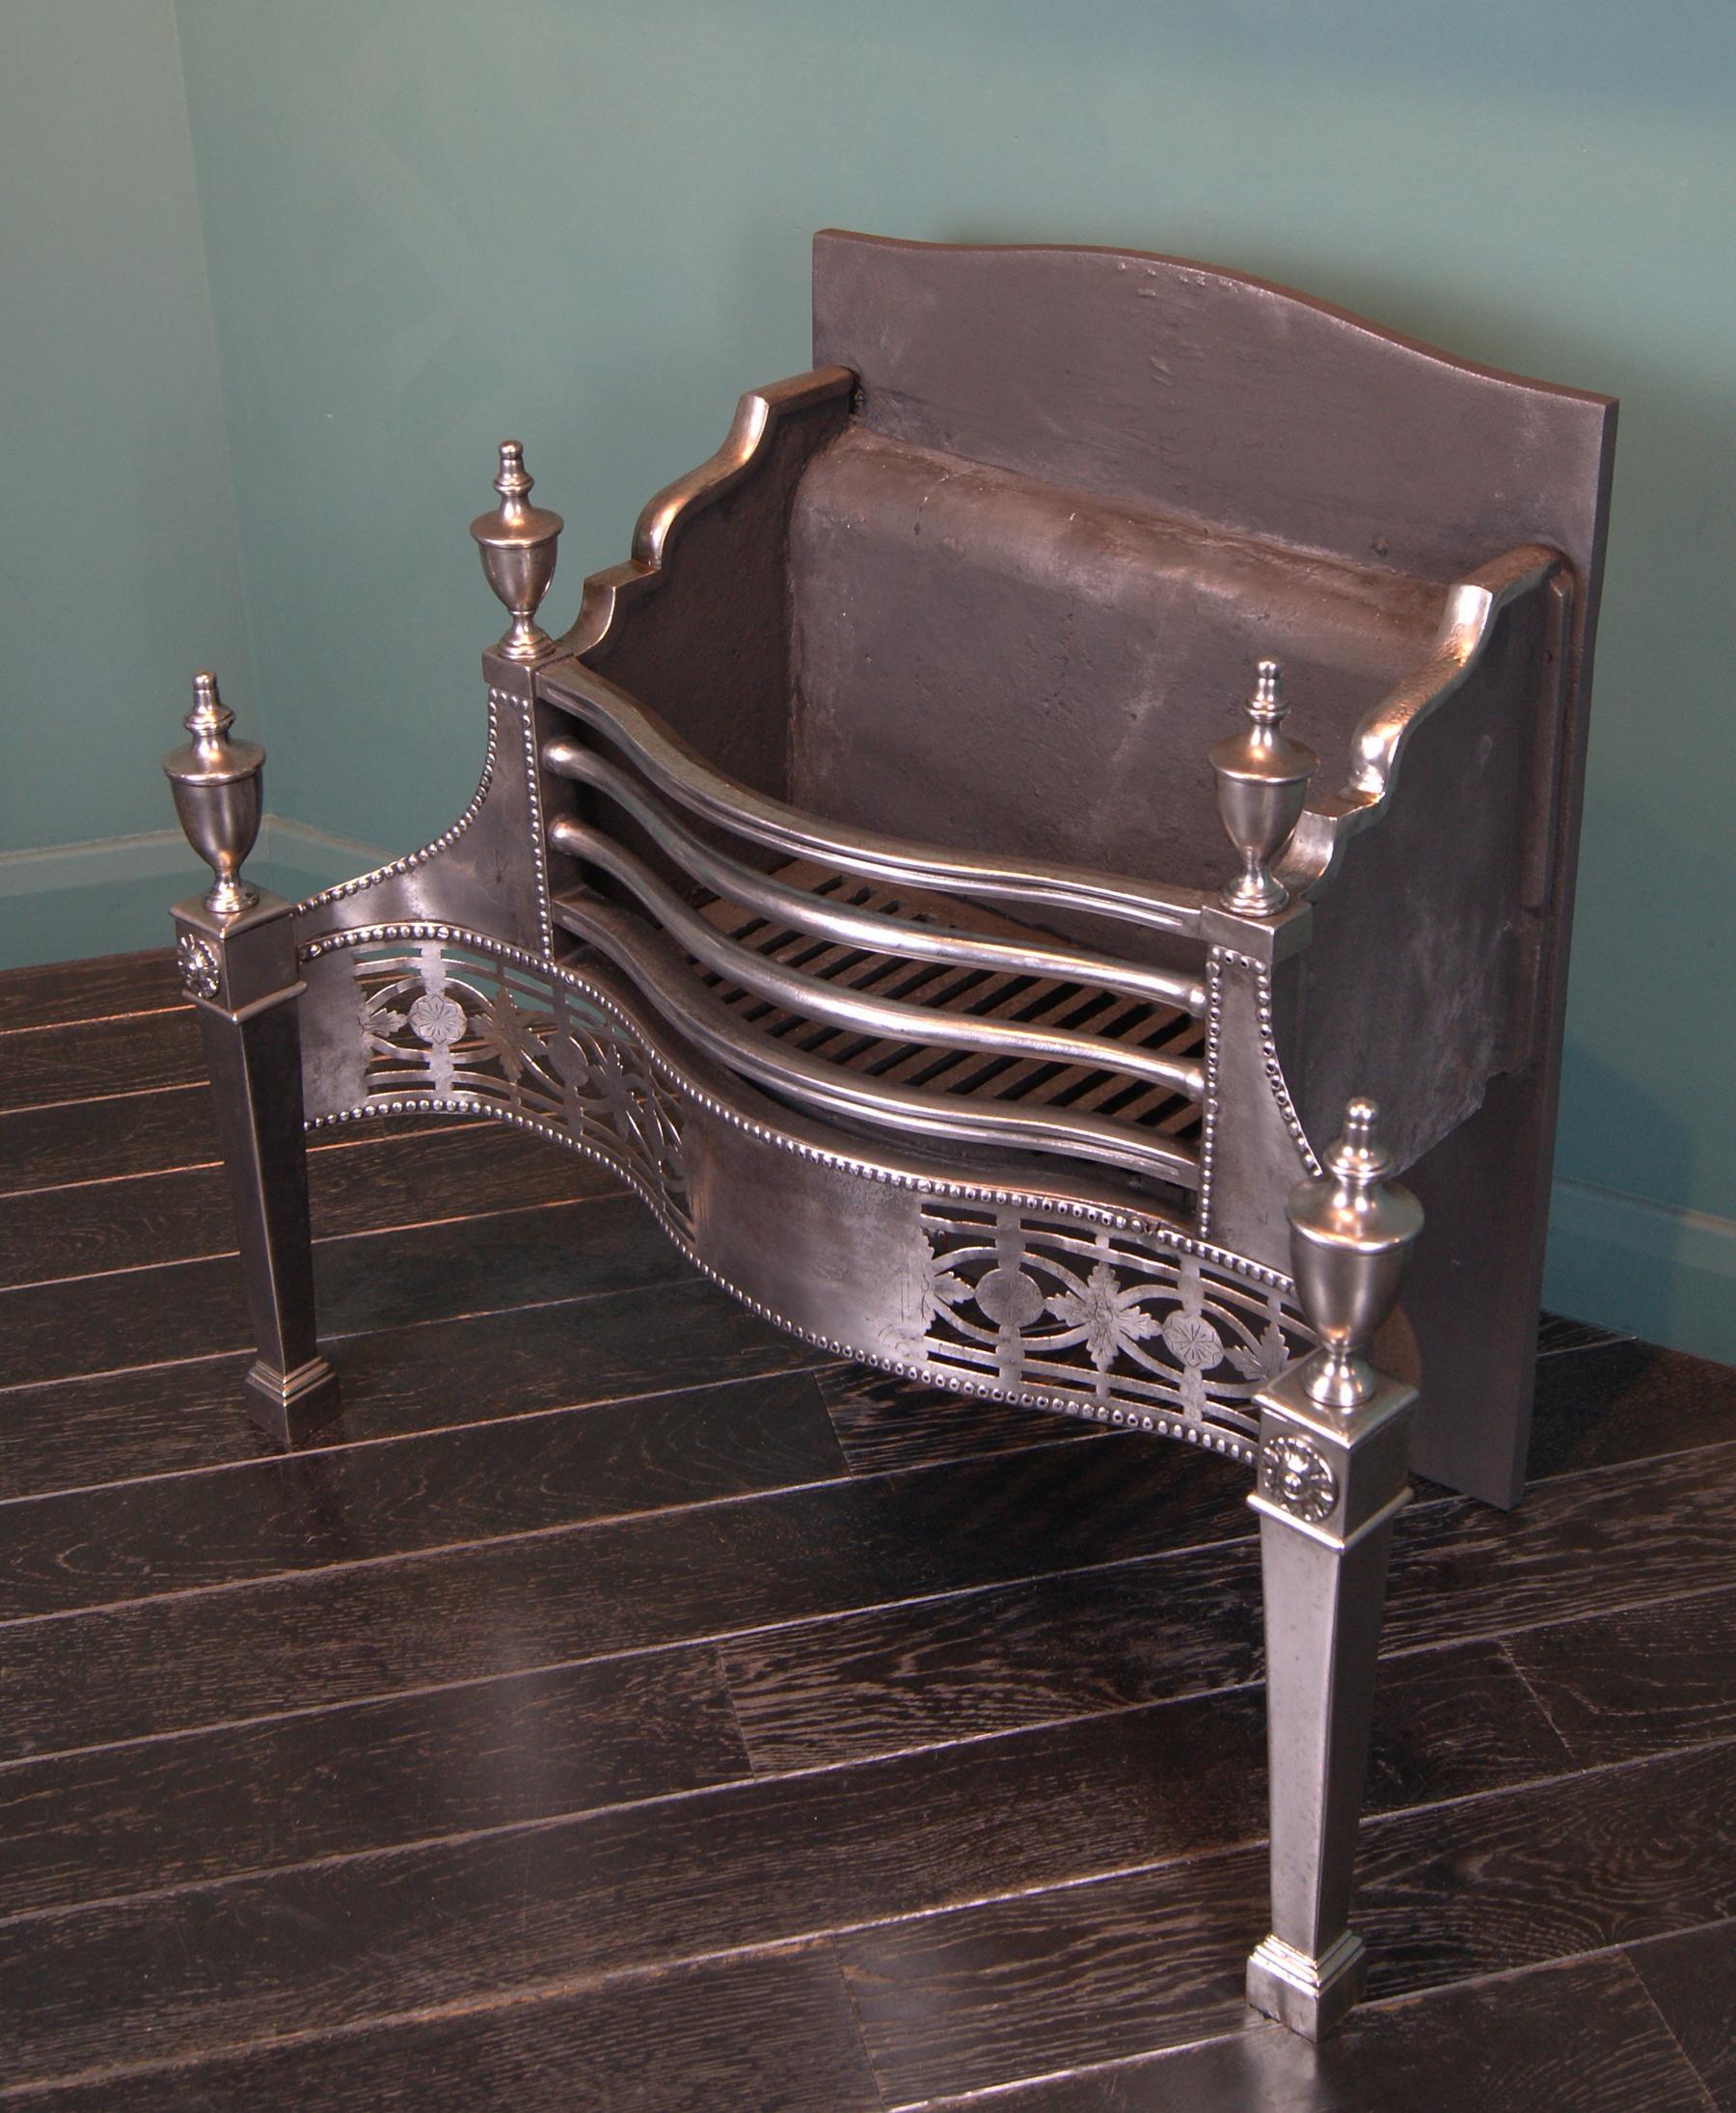 A fine polished steel Georgian revival dog grate of serpentine form. The shaped fire bars, pierced engraved fret supported on tapered legs with urn finials uppermost. Fire back with brick on roller wheels. Restored.

Circa 1890.